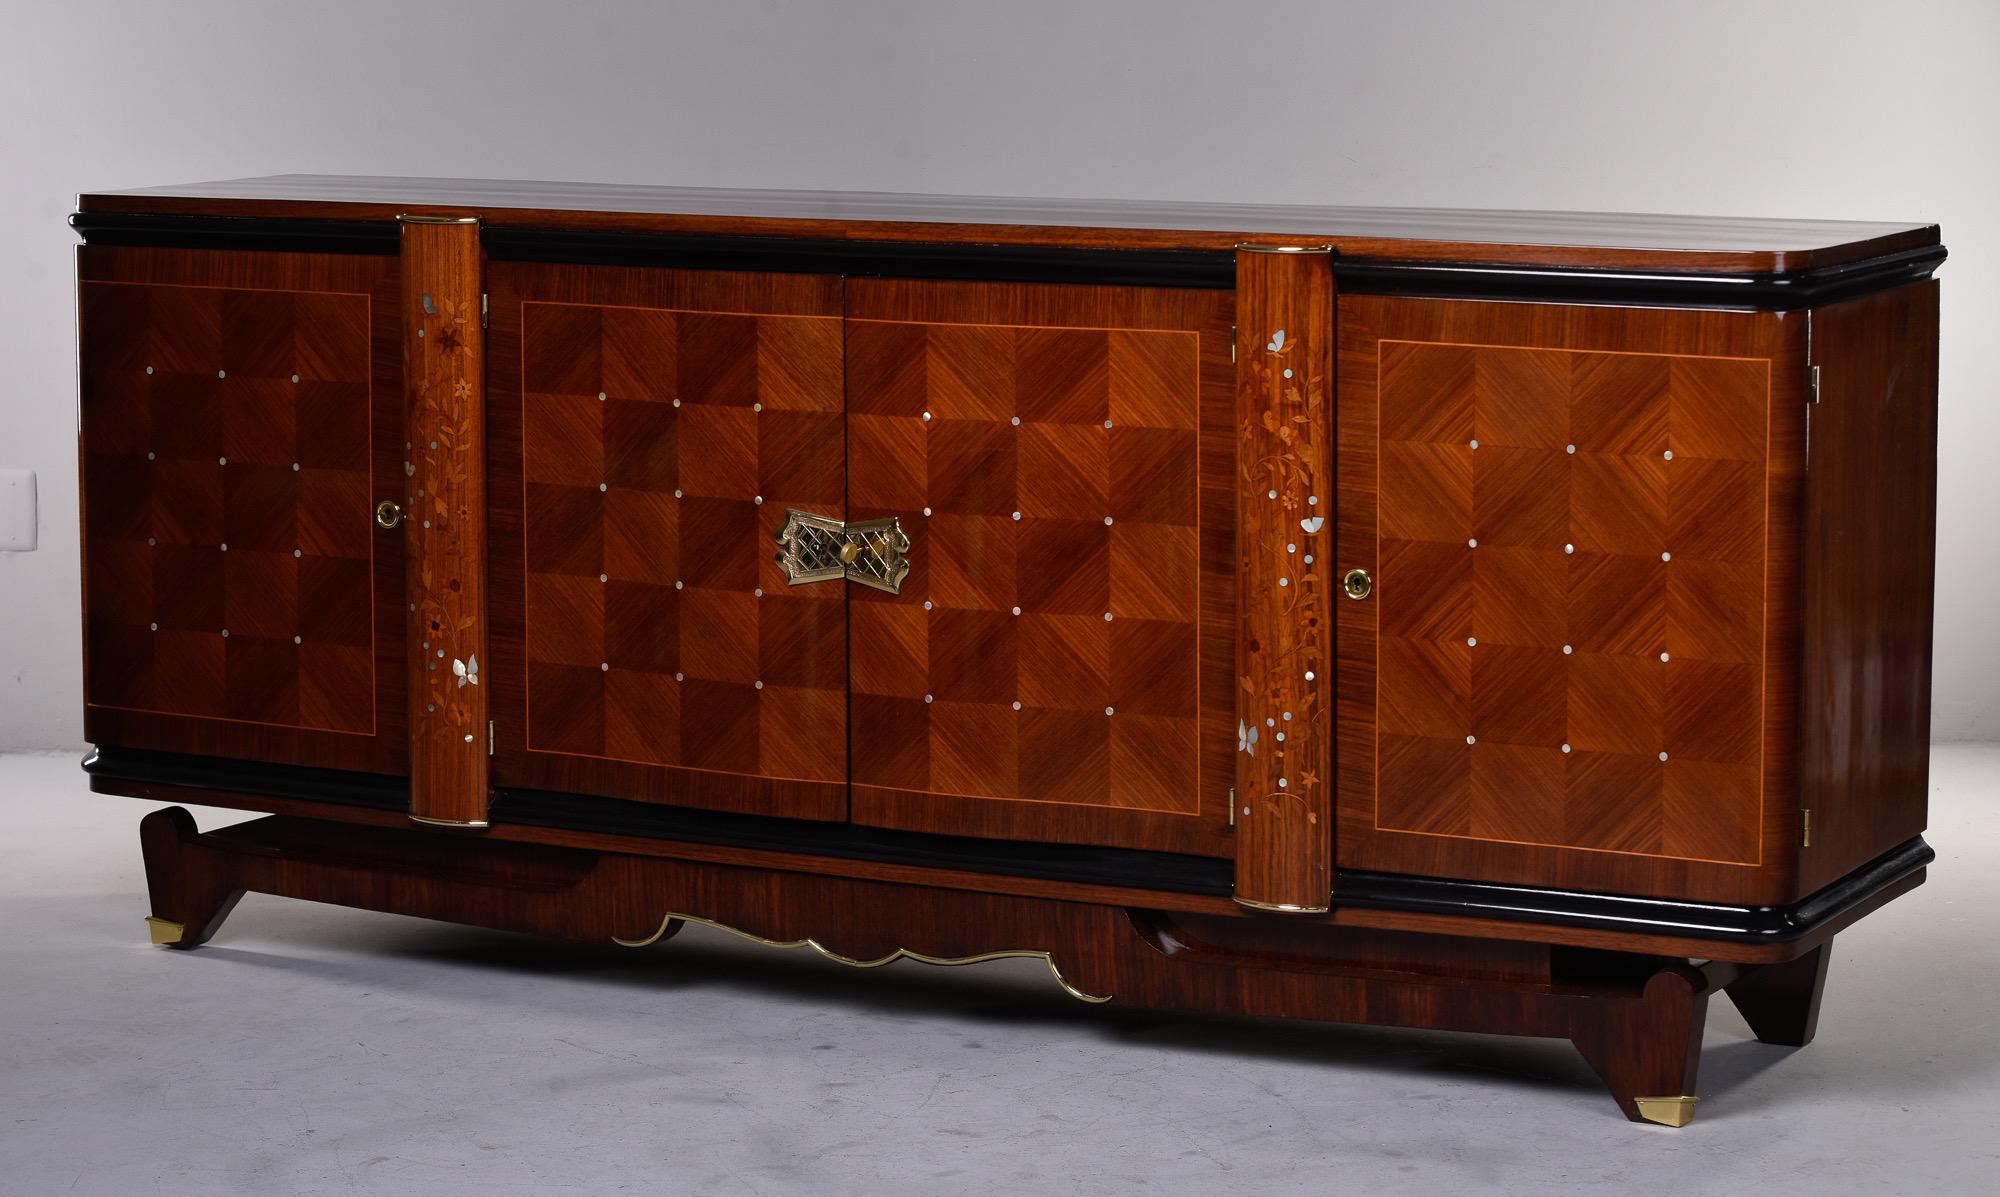 French Art Deco Palisandre Sideboard or Buffet with Mother of Pearl Inlay For Sale 9